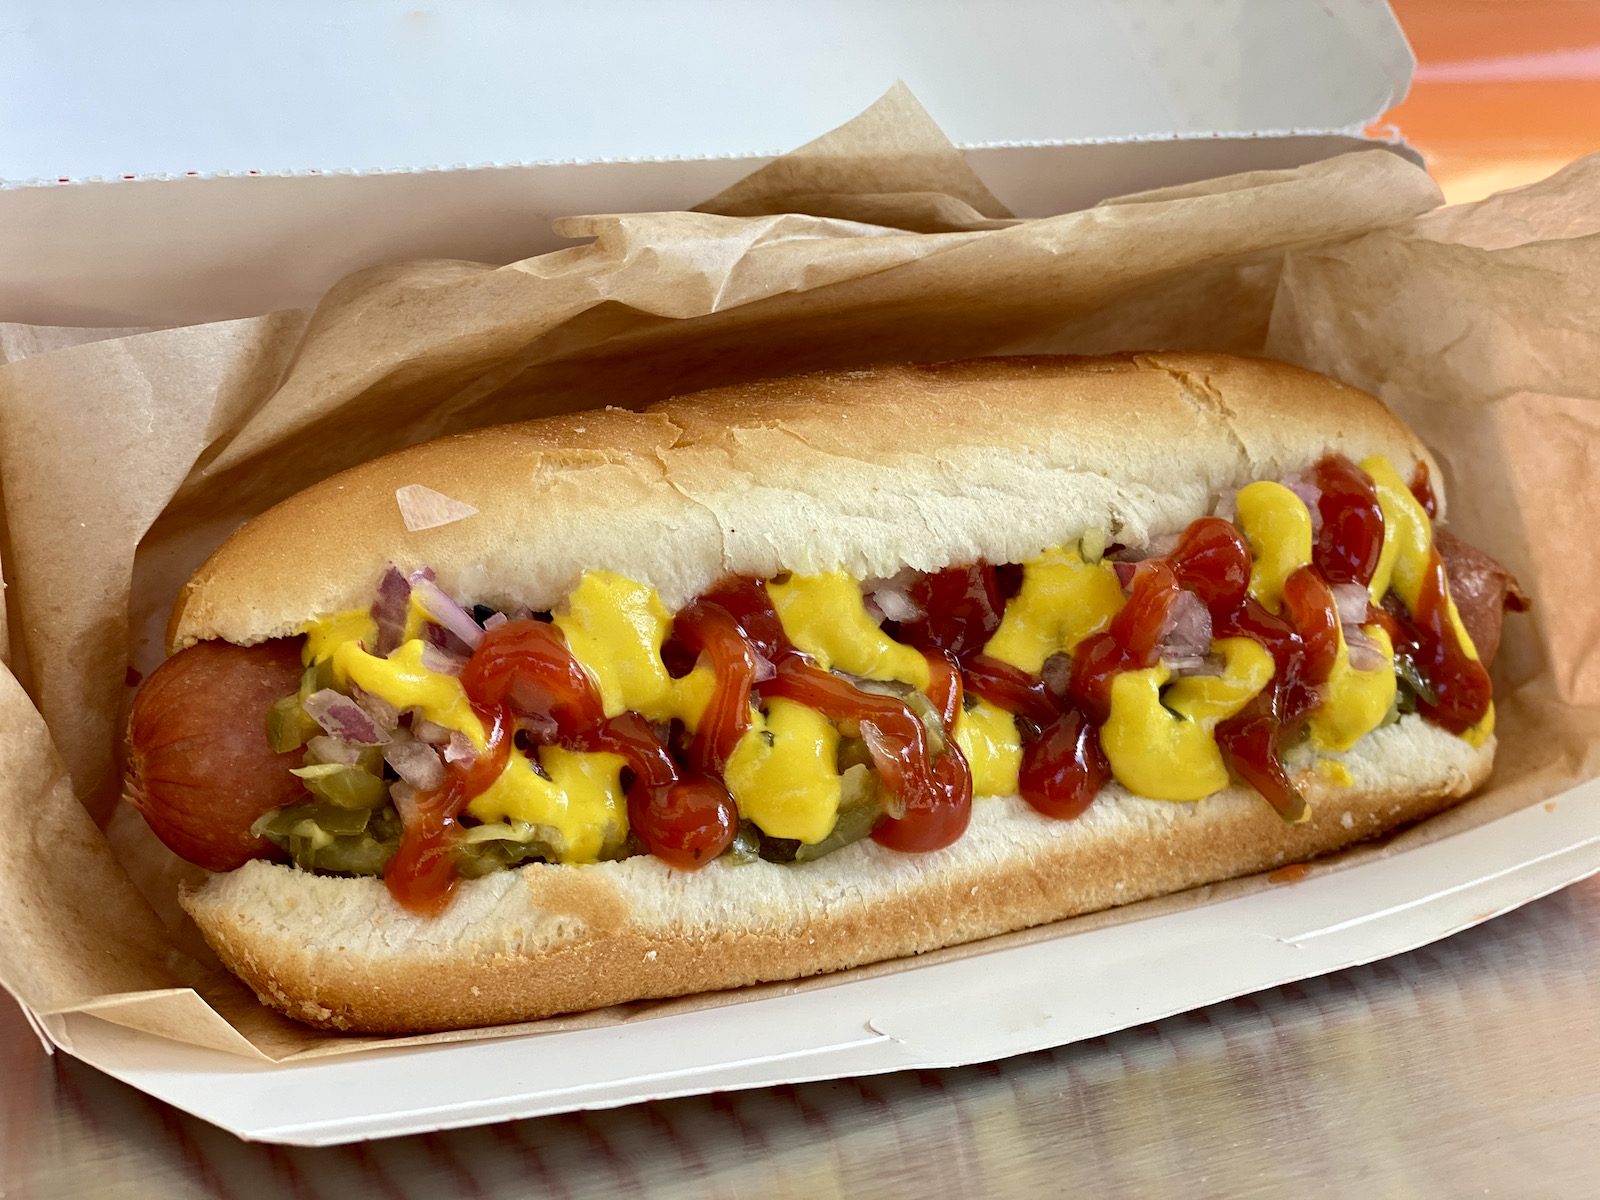 Classic hot dog at Riley's Good Dogs